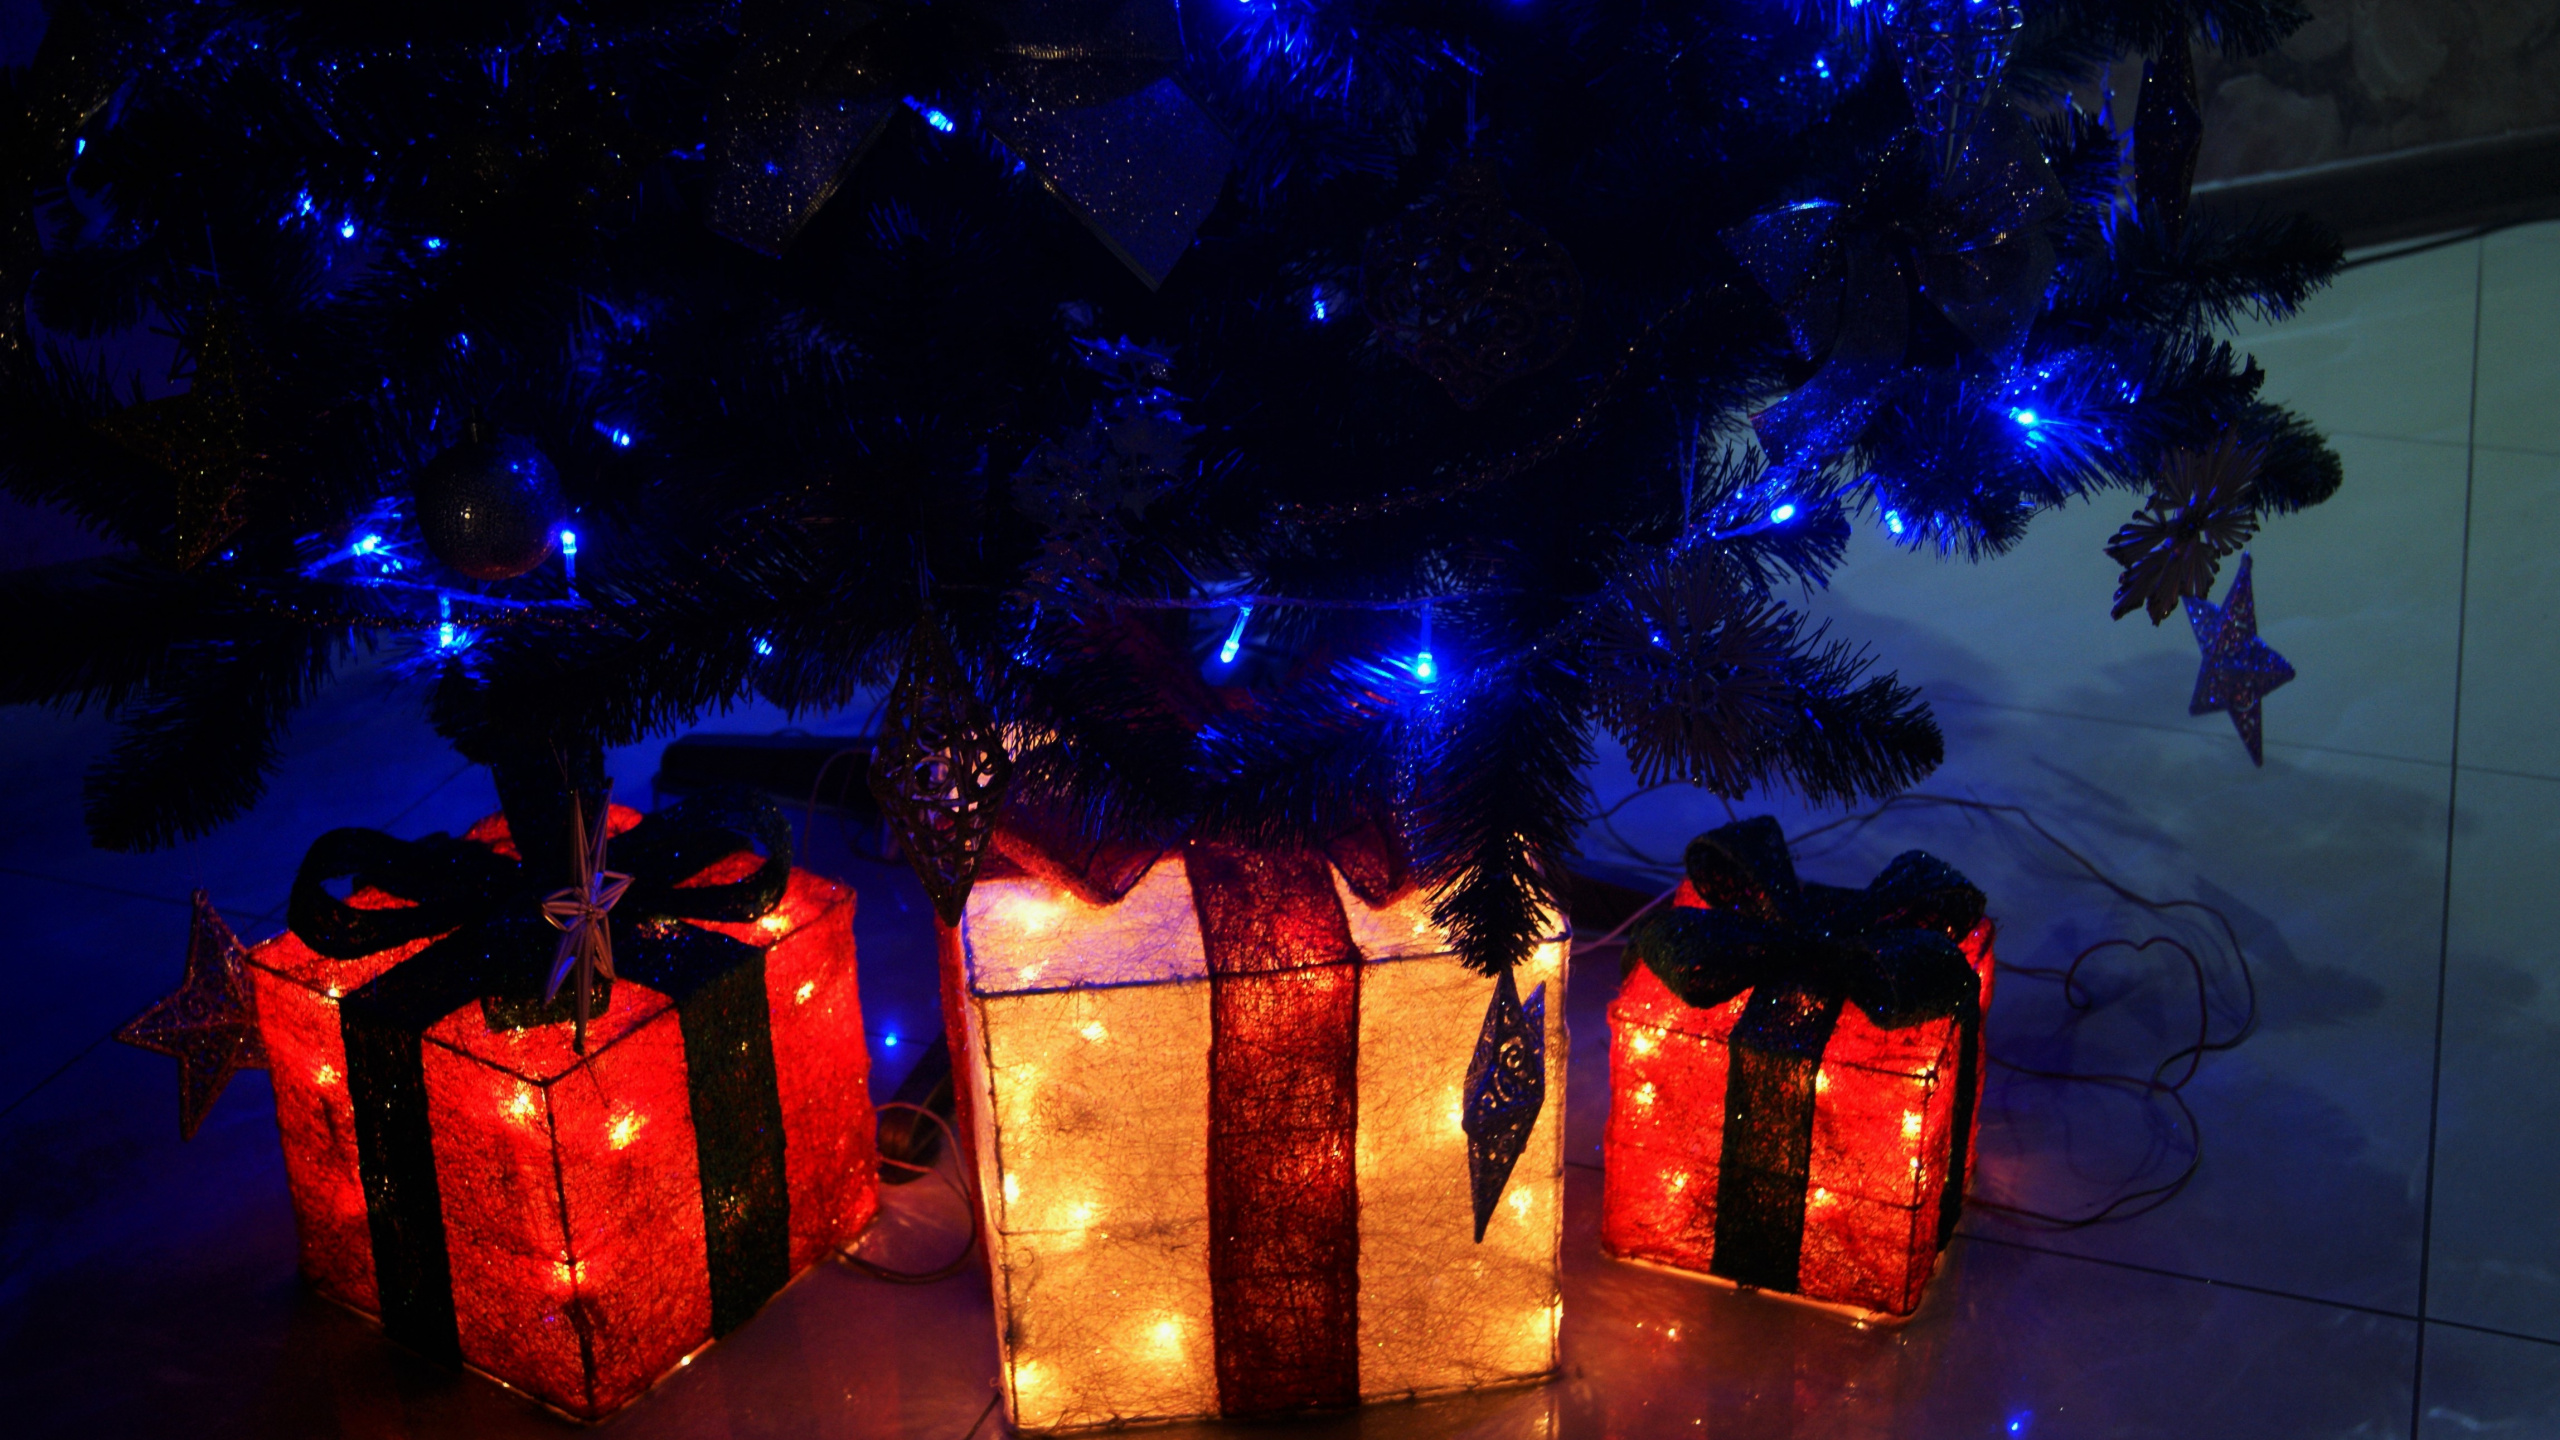 Light, Christmas Lights, New Year, Christmas Day, New Year Tree. Wallpaper in 2560x1440 Resolution